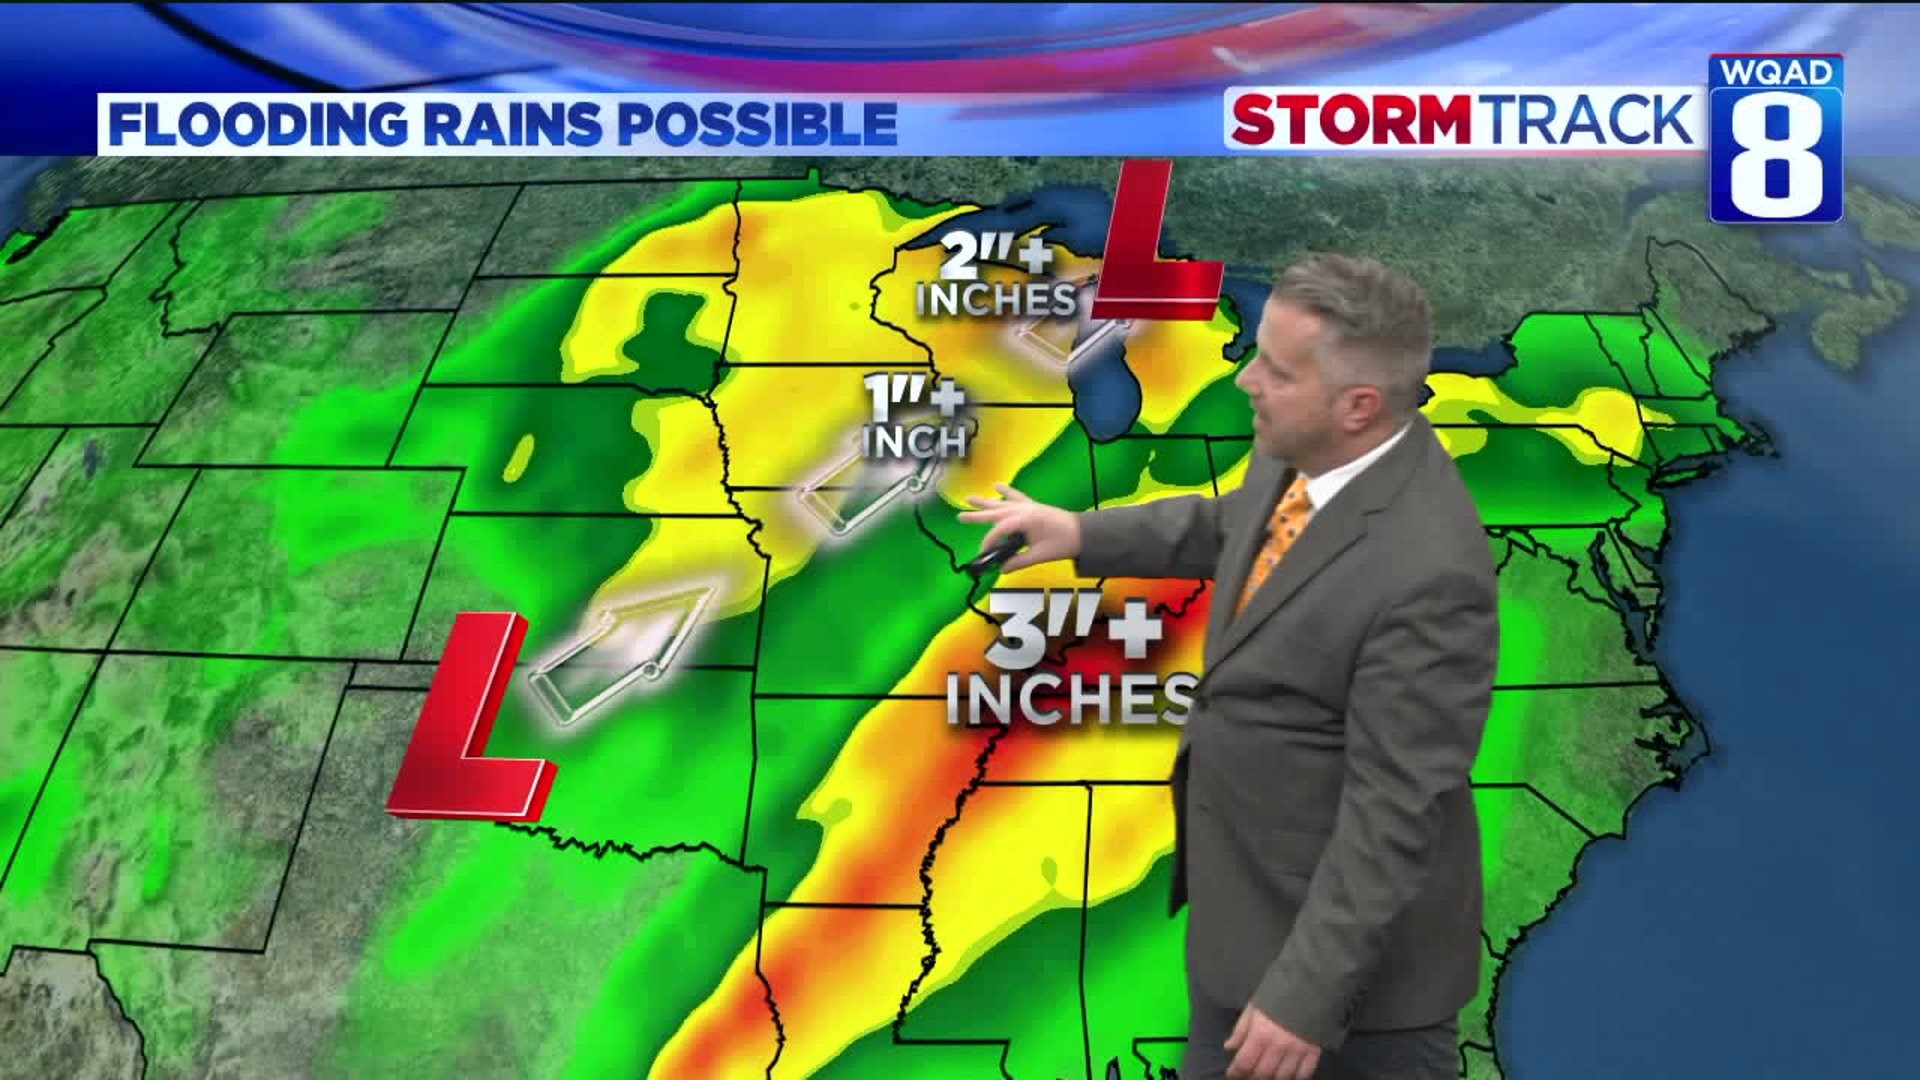 Eric is tracking heavy rain, 50 degree temperatures, thunderstorms, and snow